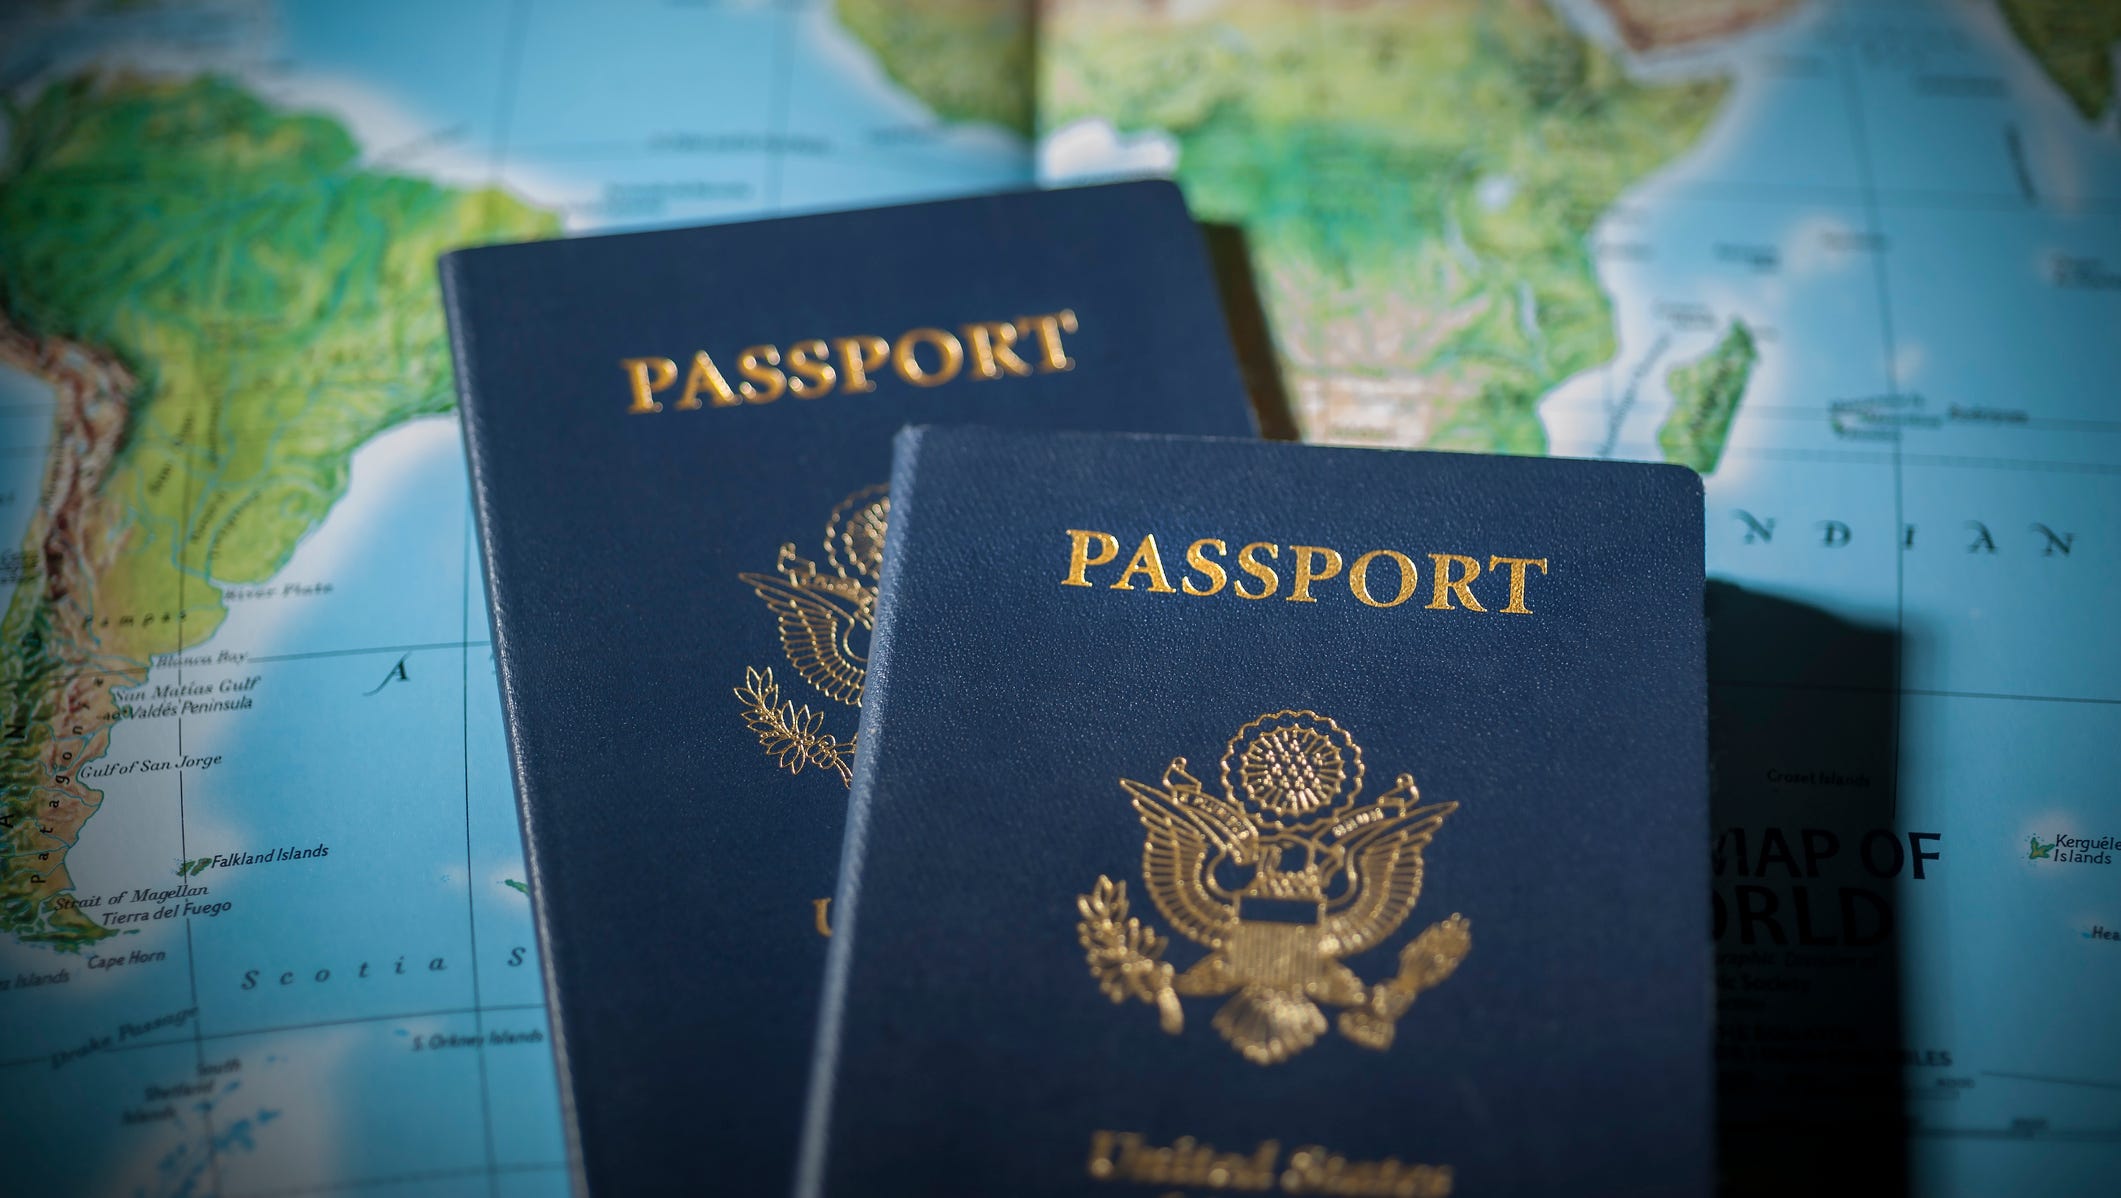 U.S. passport changes are coming Here’s what you need to know